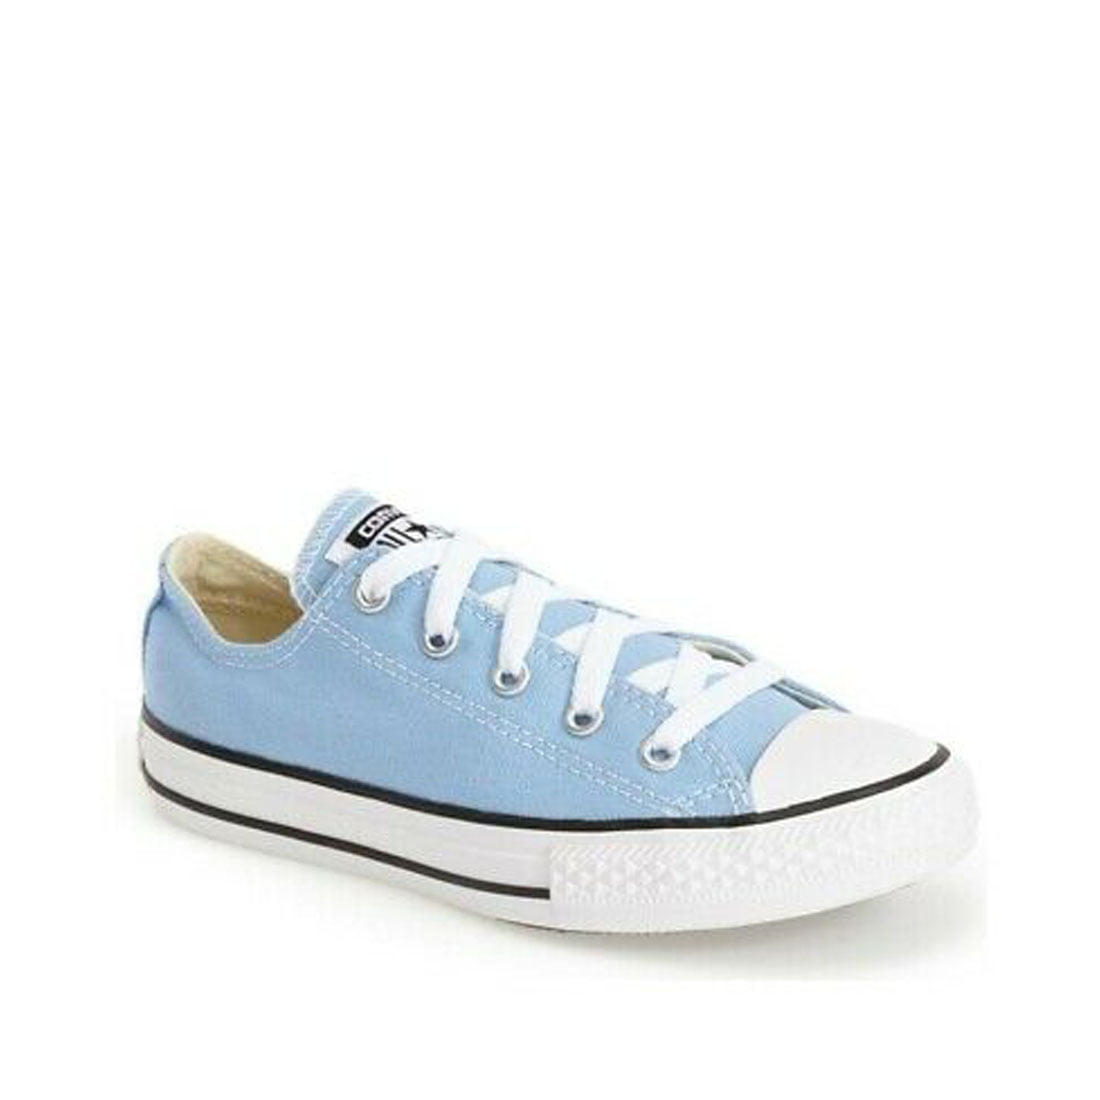 Converse Chuck Taylor All Star Ox New Authentic Unisex/Toddler Shoe Size  Toddler 11 Casual 349524F Blue Sky 